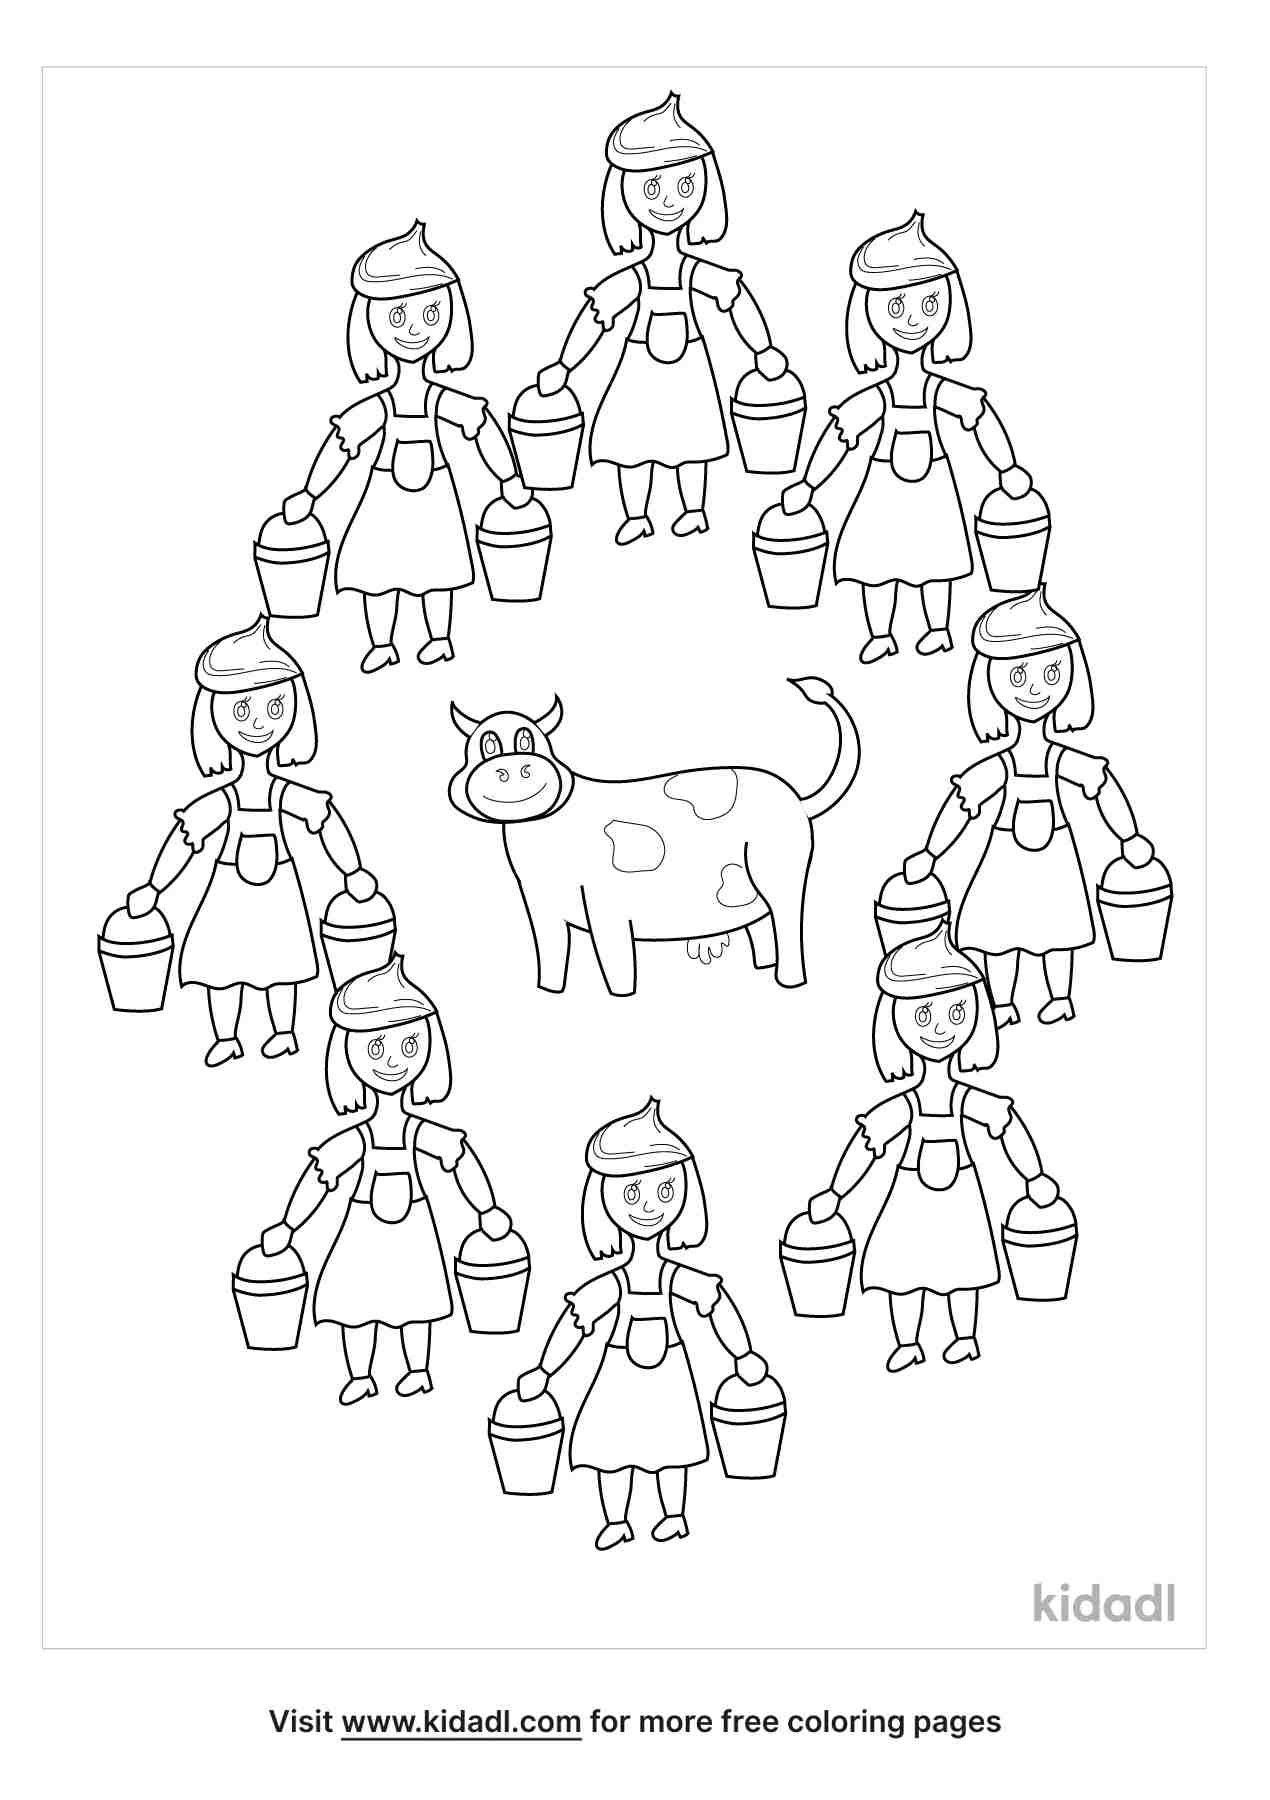 Eight Maids a Milking coloring page for kids.